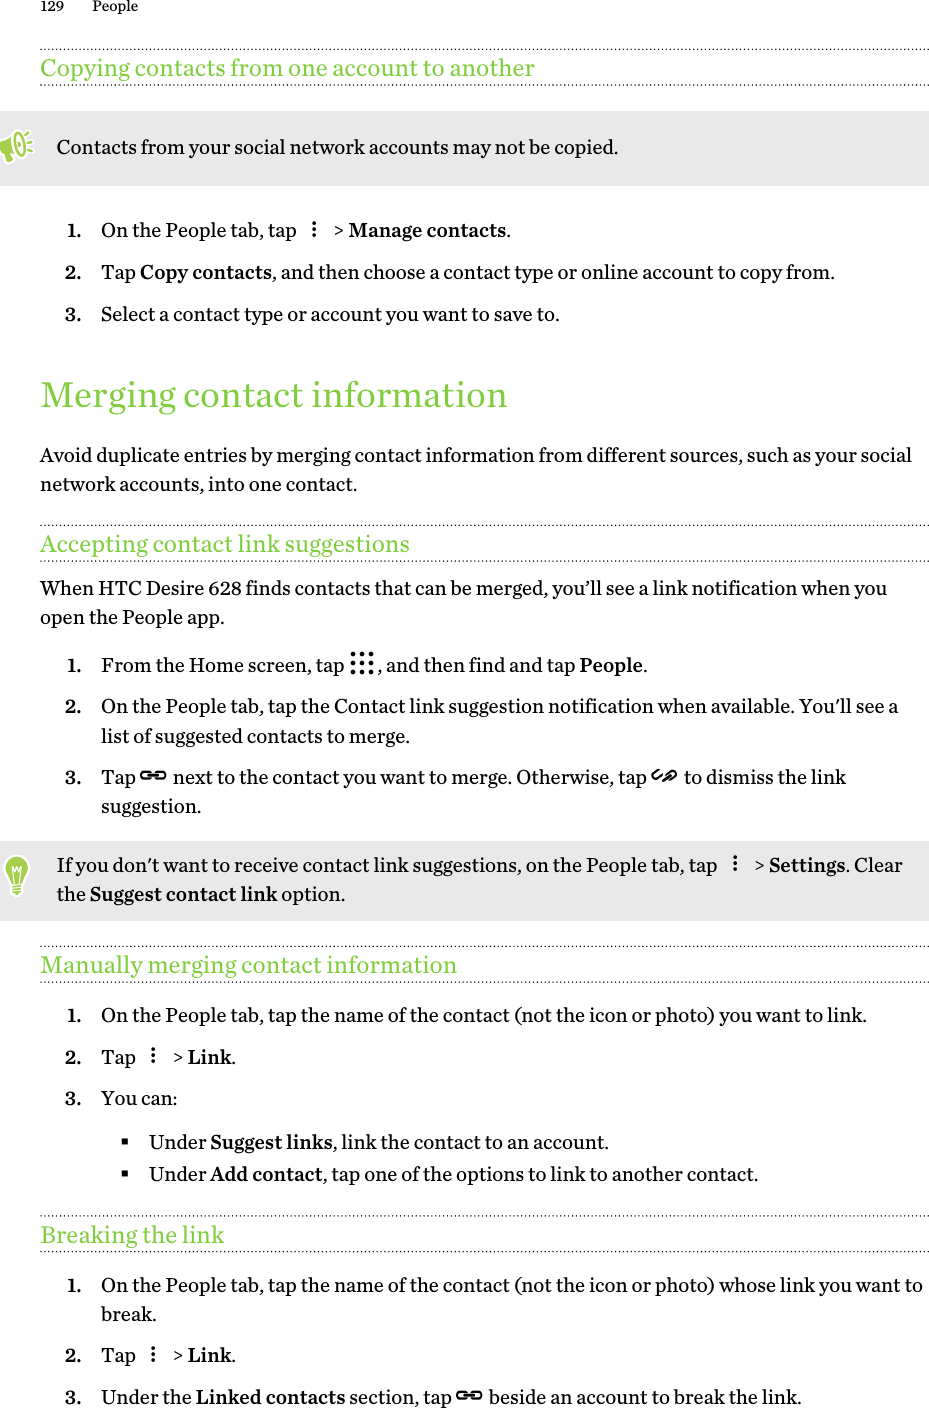 Copying contacts from one account to anotherContacts from your social network accounts may not be copied.1. On the People tab, tap   &gt; Manage contacts.2. Tap Copy contacts, and then choose a contact type or online account to copy from.3. Select a contact type or account you want to save to.Merging contact informationAvoid duplicate entries by merging contact information from different sources, such as your socialnetwork accounts, into one contact.Accepting contact link suggestionsWhen HTC Desire 628 finds contacts that can be merged, you’ll see a link notification when youopen the People app.1. From the Home screen, tap  , and then find and tap People.2. On the People tab, tap the Contact link suggestion notification when available. You&apos;ll see alist of suggested contacts to merge.3. Tap   next to the contact you want to merge. Otherwise, tap   to dismiss the linksuggestion.If you don&apos;t want to receive contact link suggestions, on the People tab, tap   &gt; Settings. Clearthe Suggest contact link option.Manually merging contact information1. On the People tab, tap the name of the contact (not the icon or photo) you want to link.2. Tap   &gt; Link.3. You can:§Under Suggest links, link the contact to an account.§Under Add contact, tap one of the options to link to another contact.Breaking the link1. On the People tab, tap the name of the contact (not the icon or photo) whose link you want tobreak.2. Tap   &gt; Link.3. Under the Linked contacts section, tap   beside an account to break the link.129 People